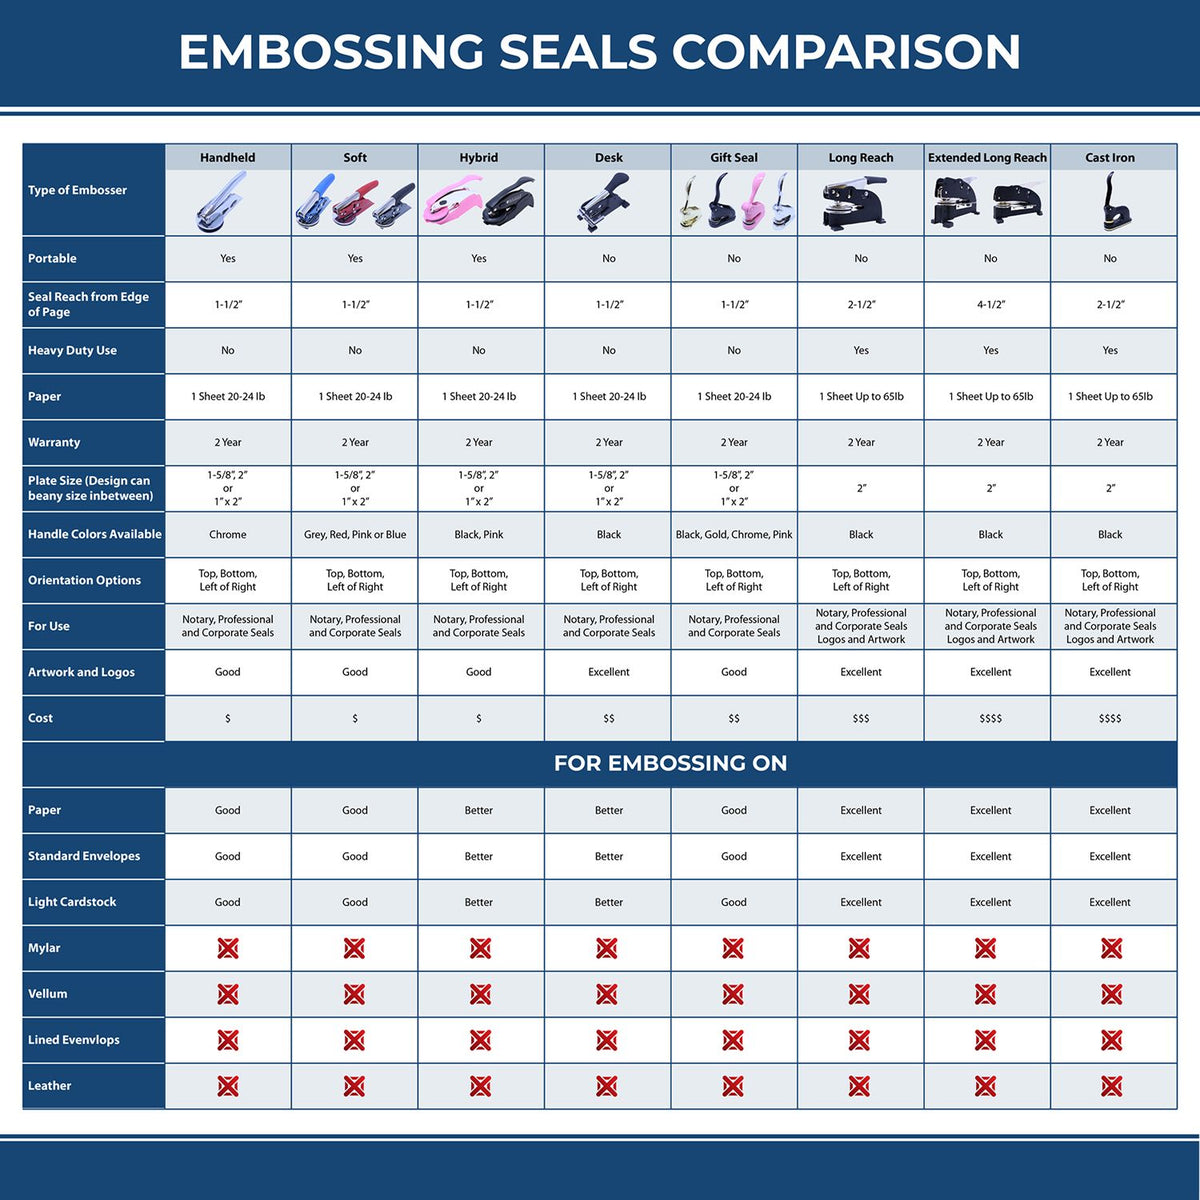 A comparison chart for the different types of mount models available for the Hybrid Hawaii Land Surveyor Seal